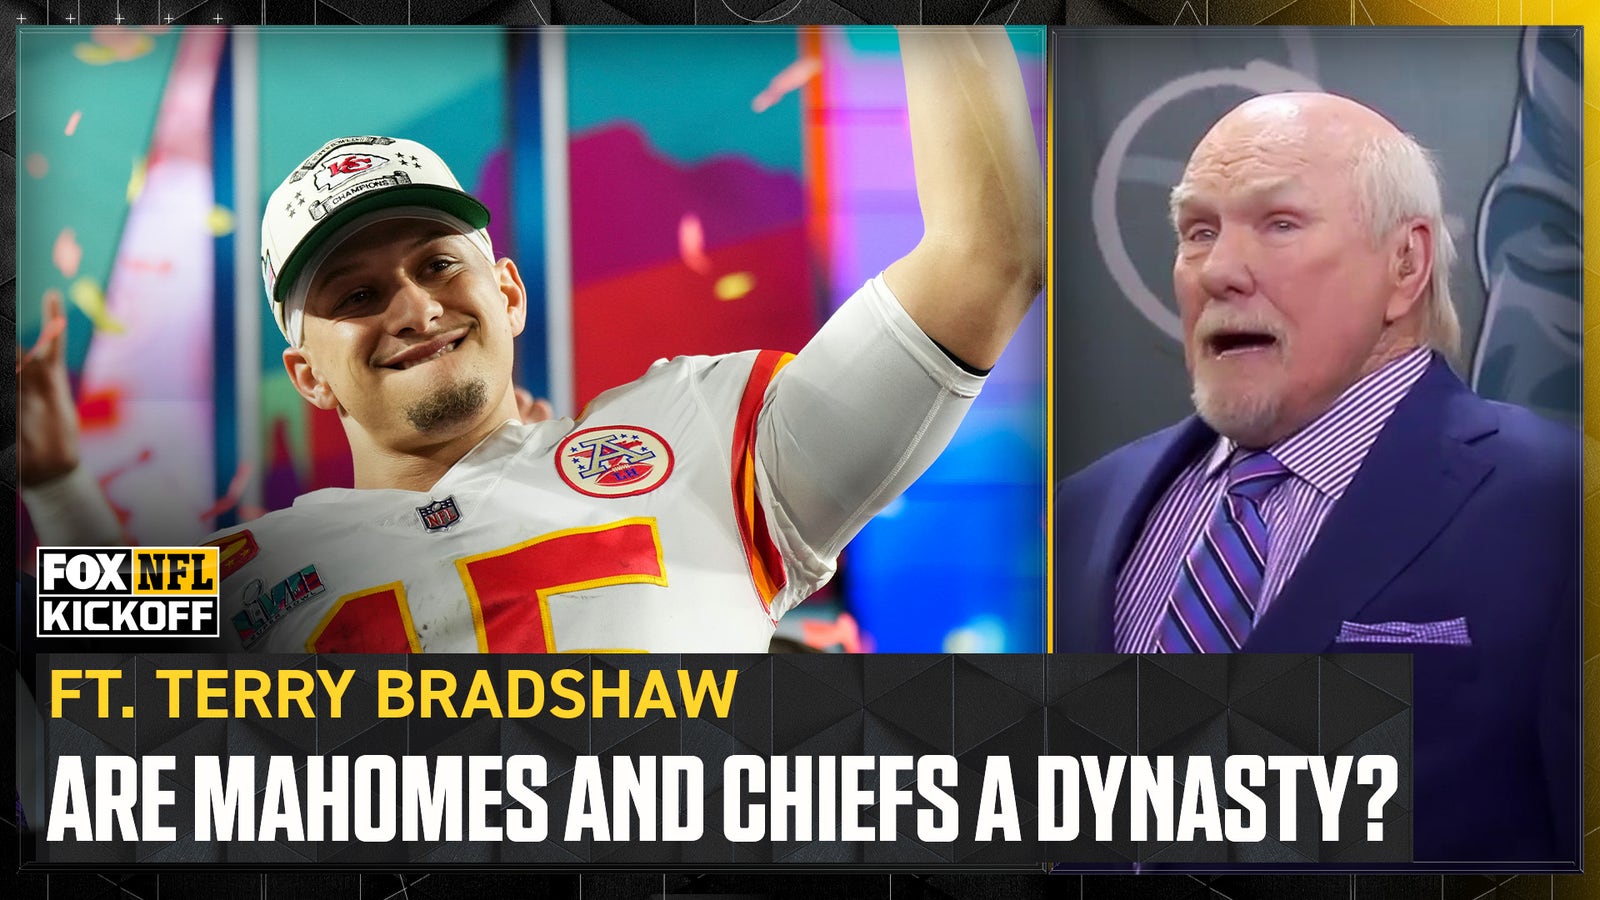 Are Patrick Mahomes and the Chiefs a dynasty? 